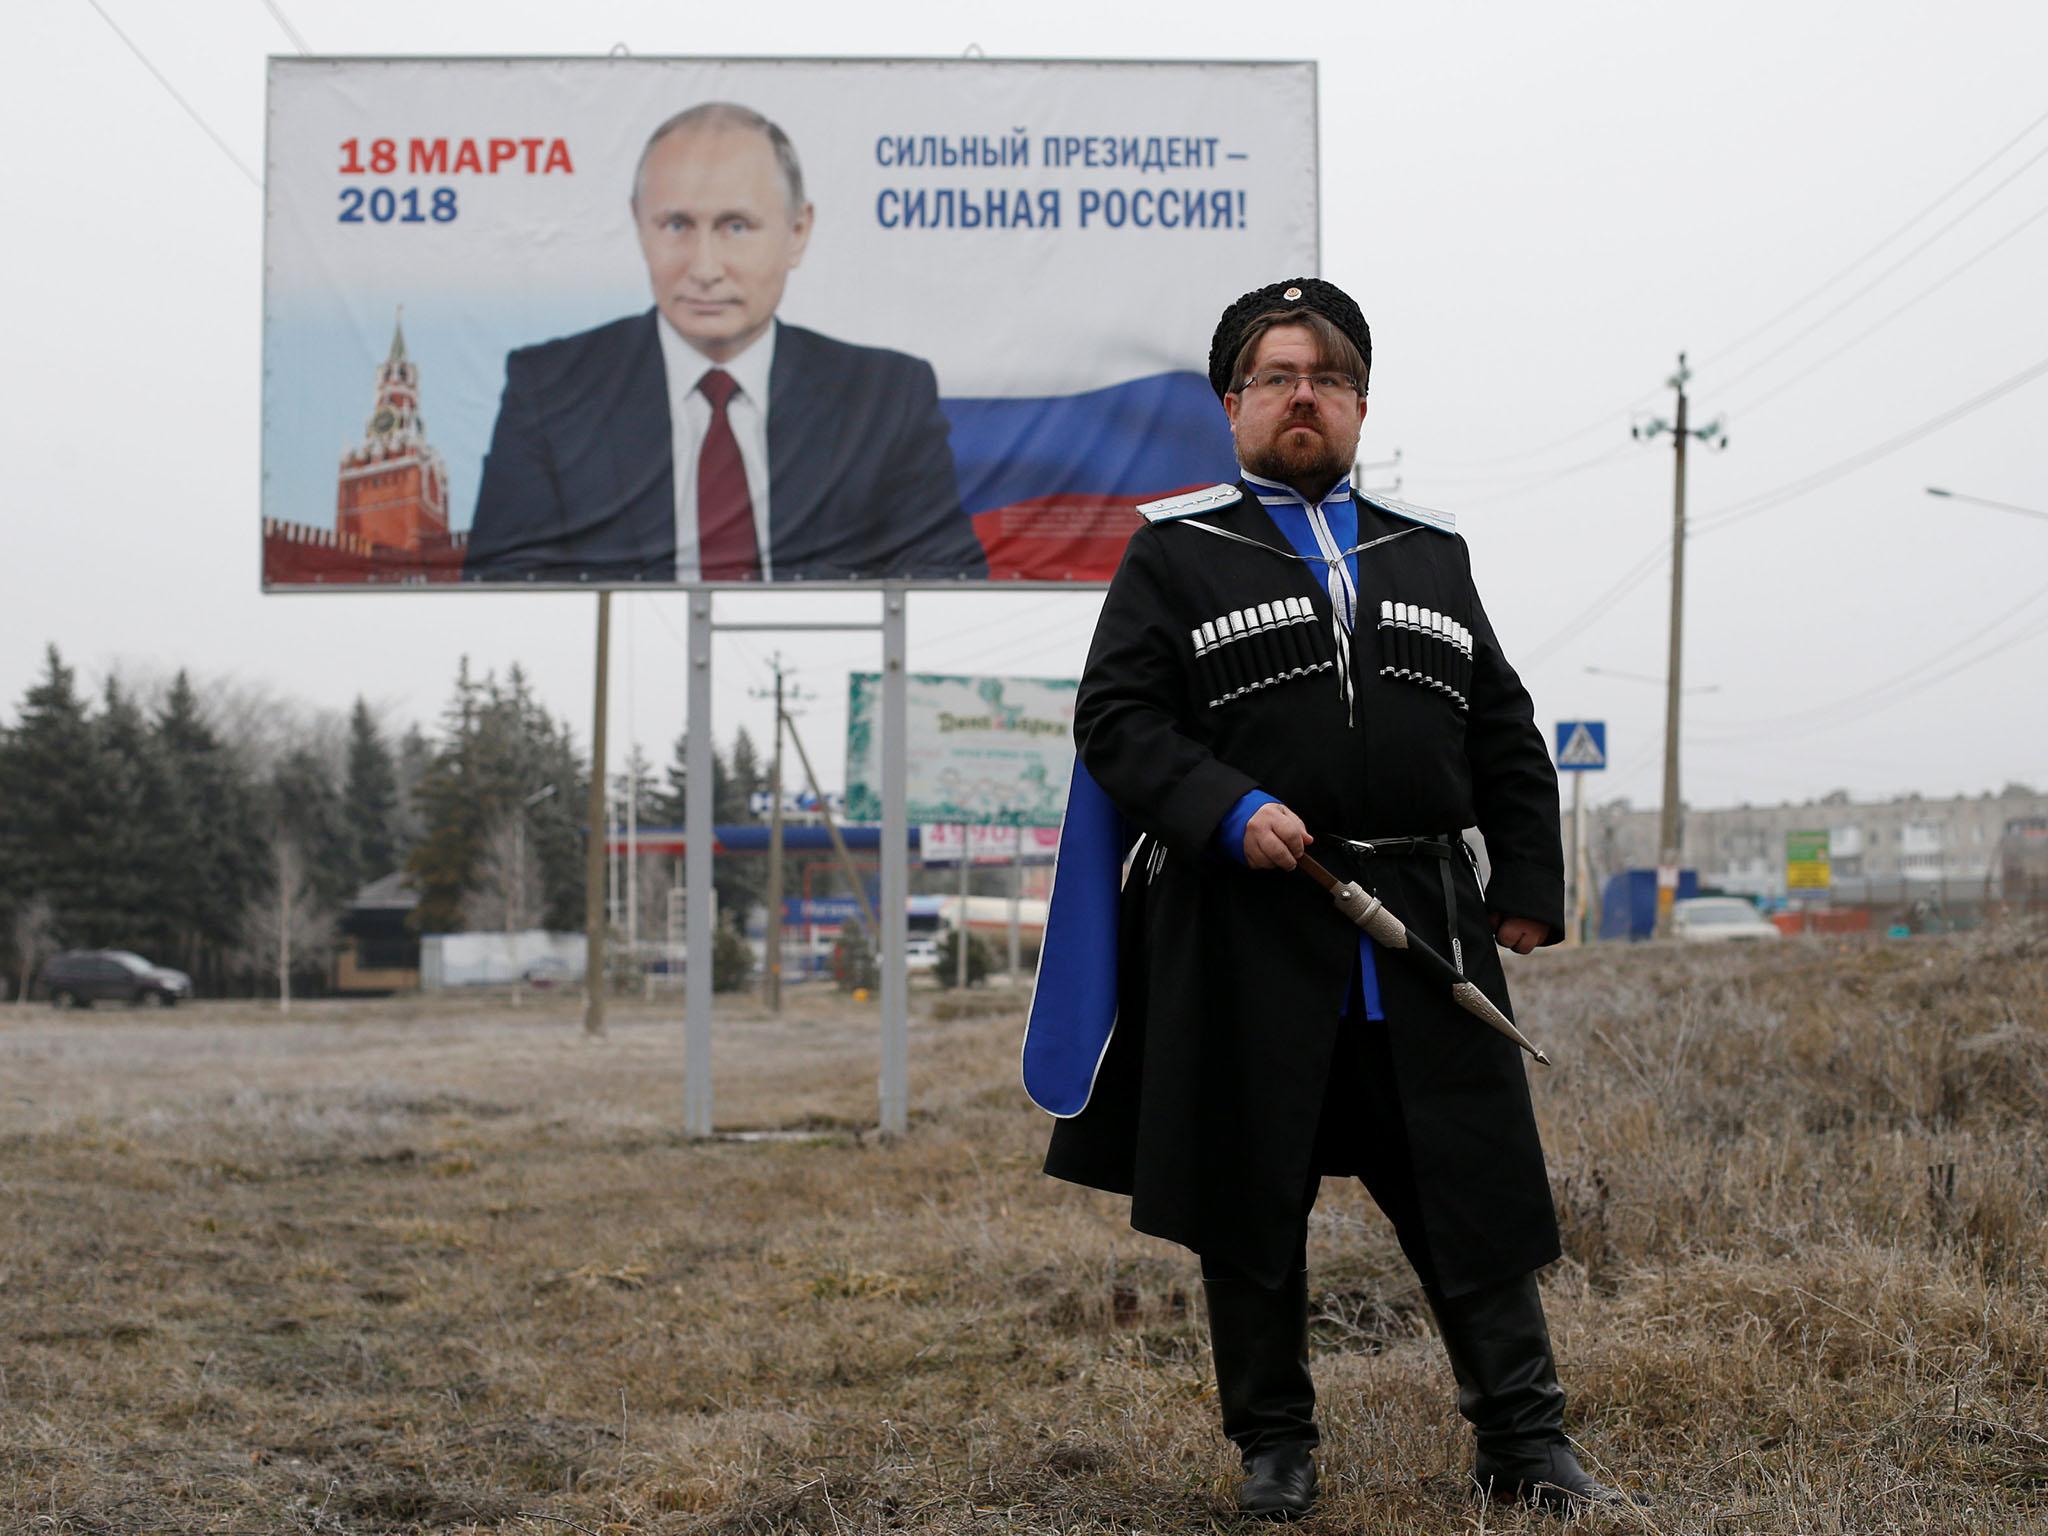 Nothing in Russia contradicts the expectation of an emphatic Putin victory